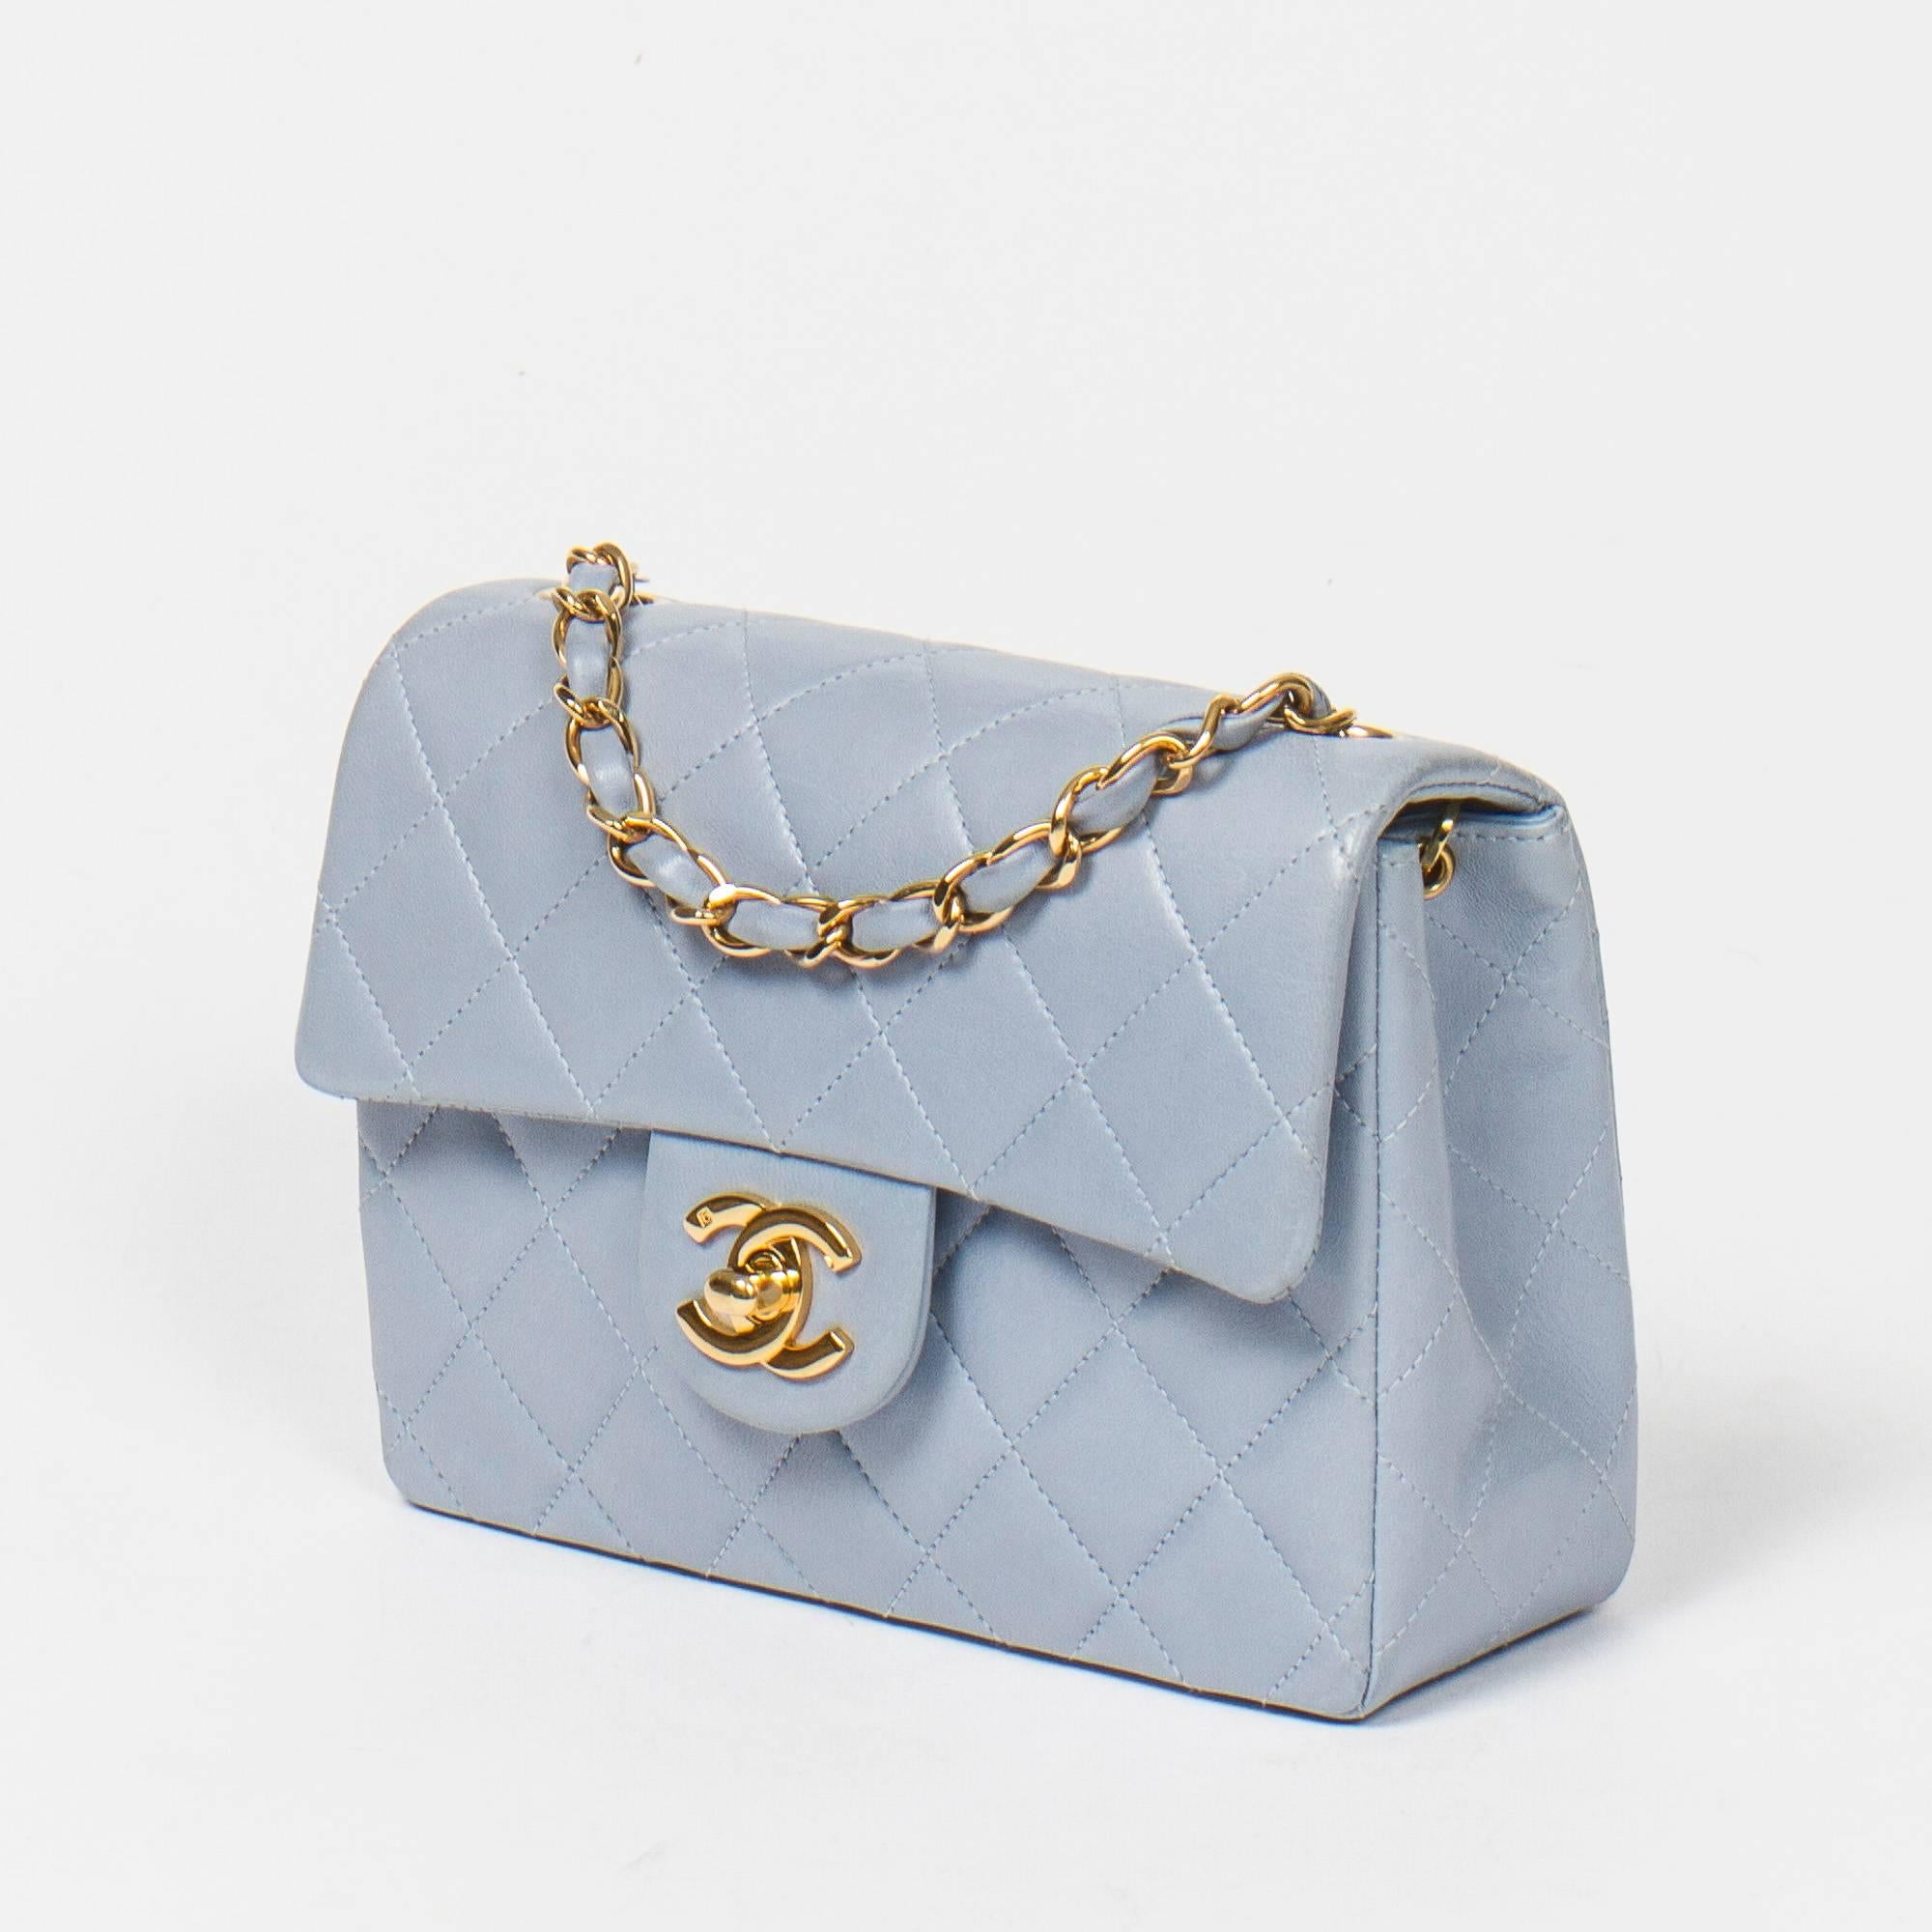 Timeless Mini in Light blue leather with gold tone chain strap interlaced with blue leather. Turnlock 